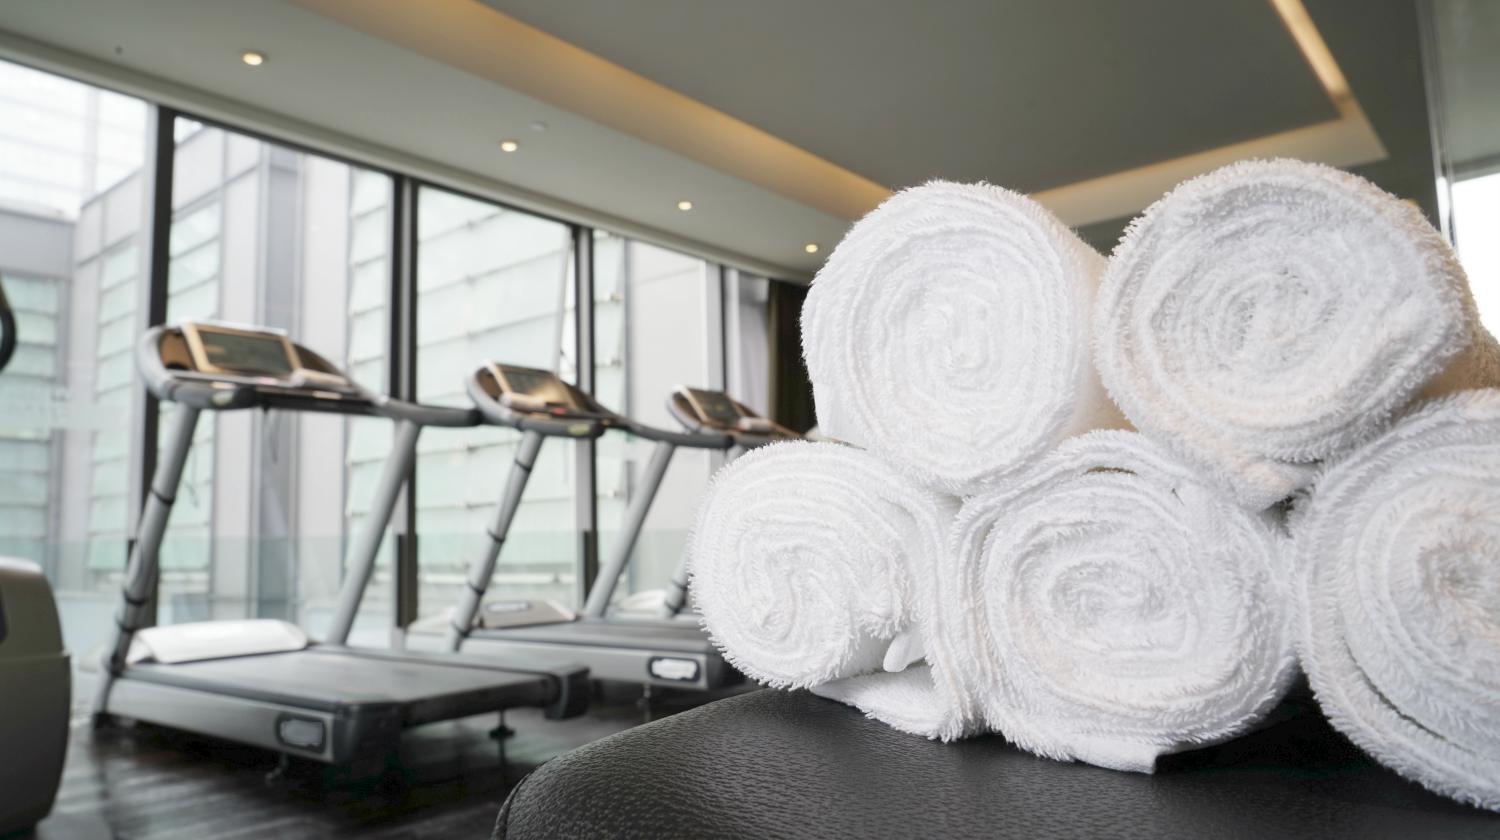 Genuinely Nice Gym Towels To Add A Touch Of Class To Your Workouts